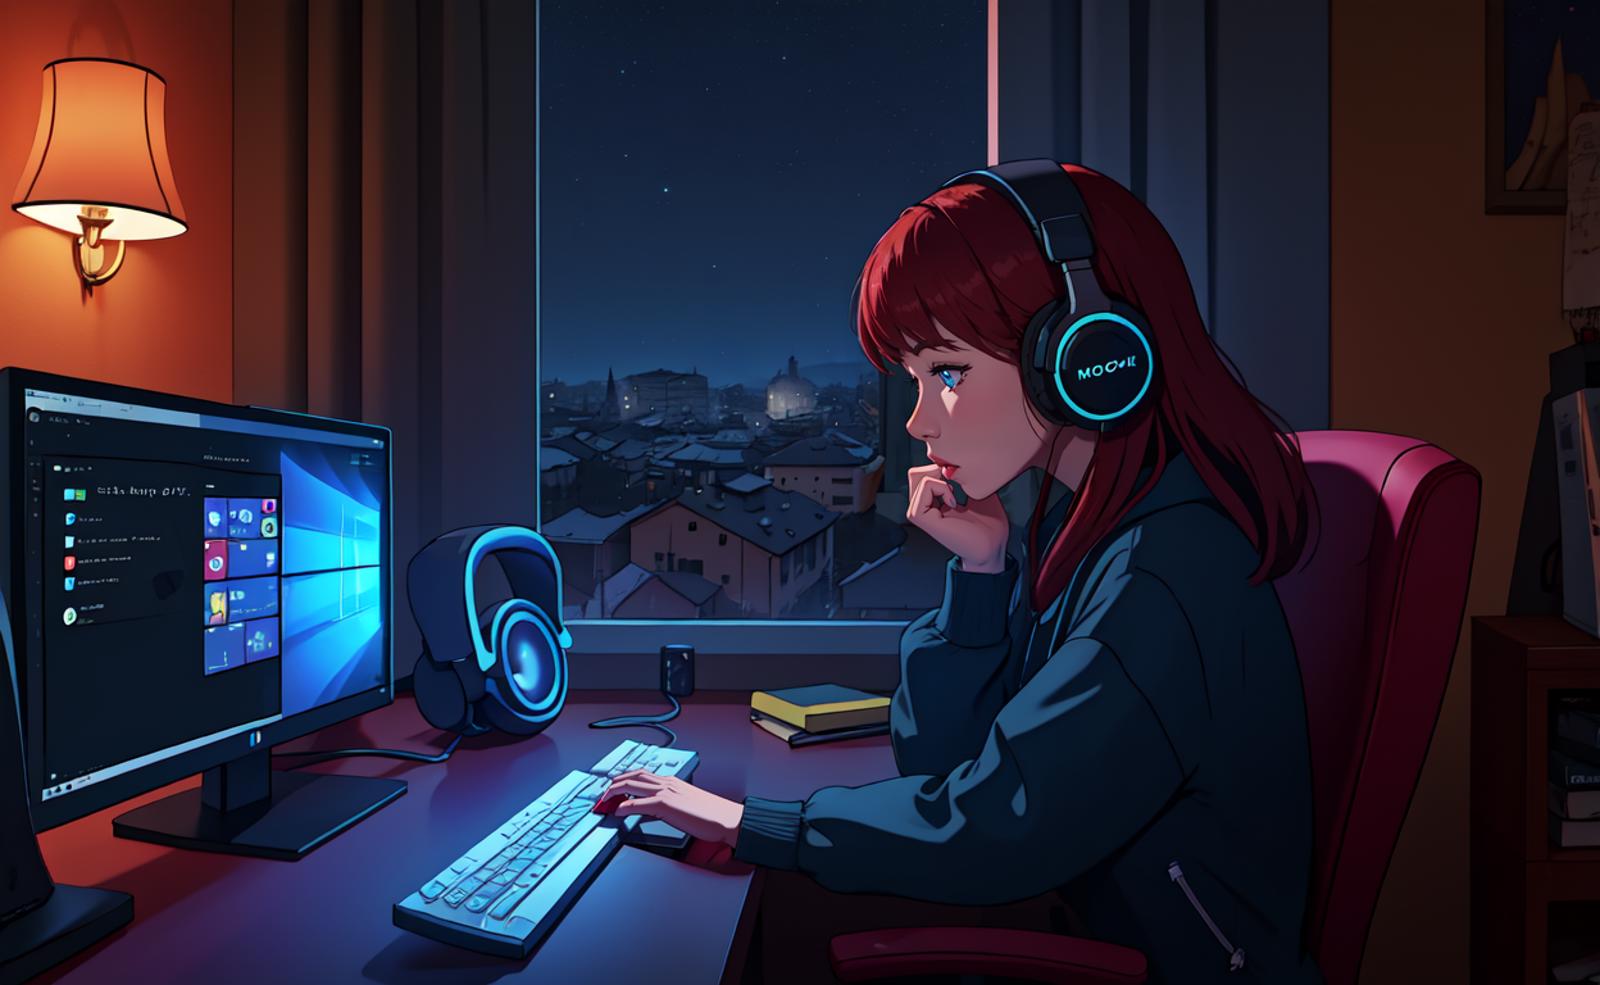 Lo-Fi Study Wallpapers image by caine94